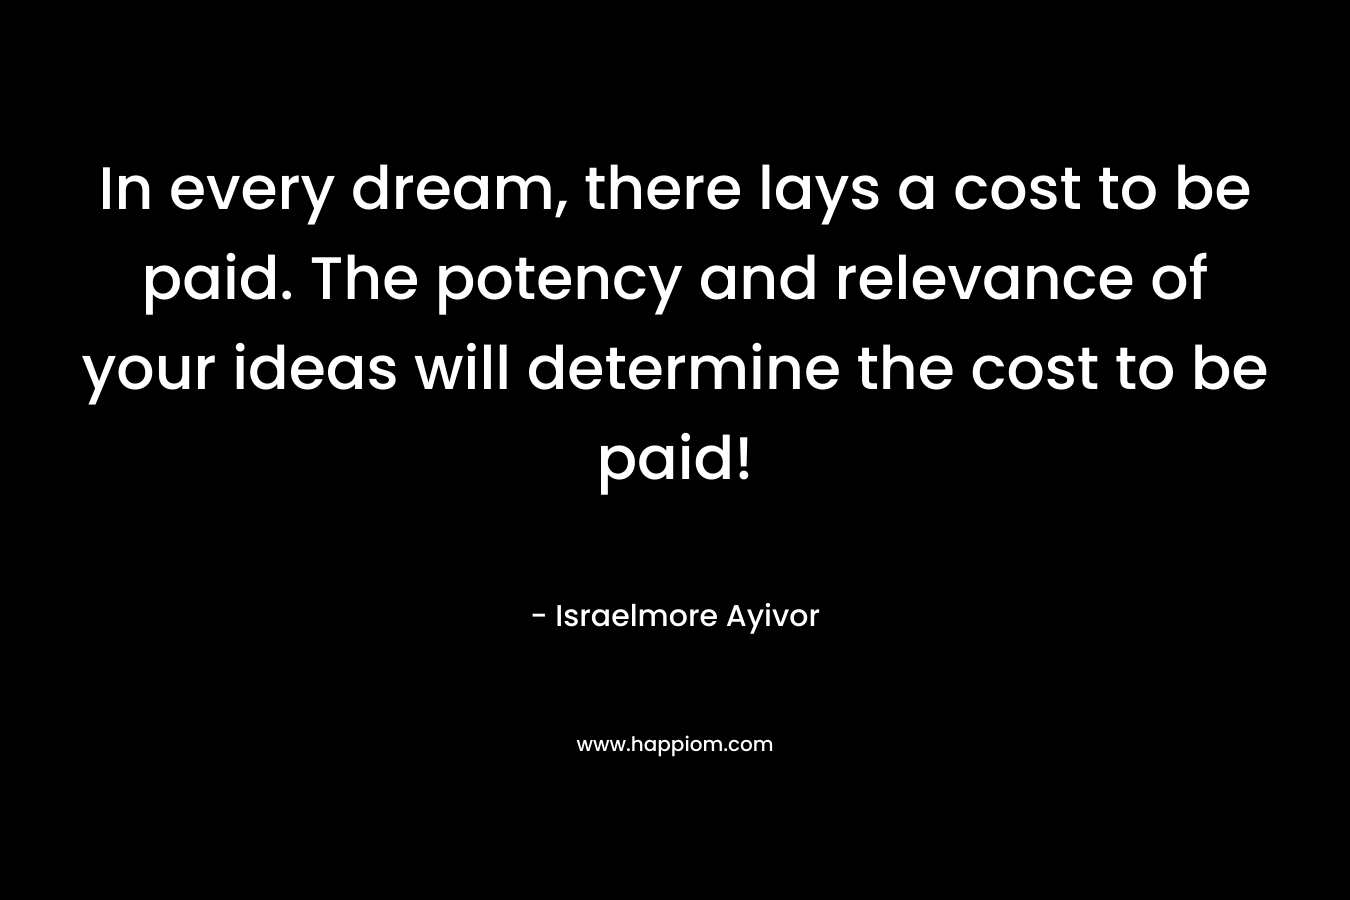 In every dream, there lays a cost to be paid. The potency and relevance of your ideas will determine the cost to be paid! – Israelmore Ayivor